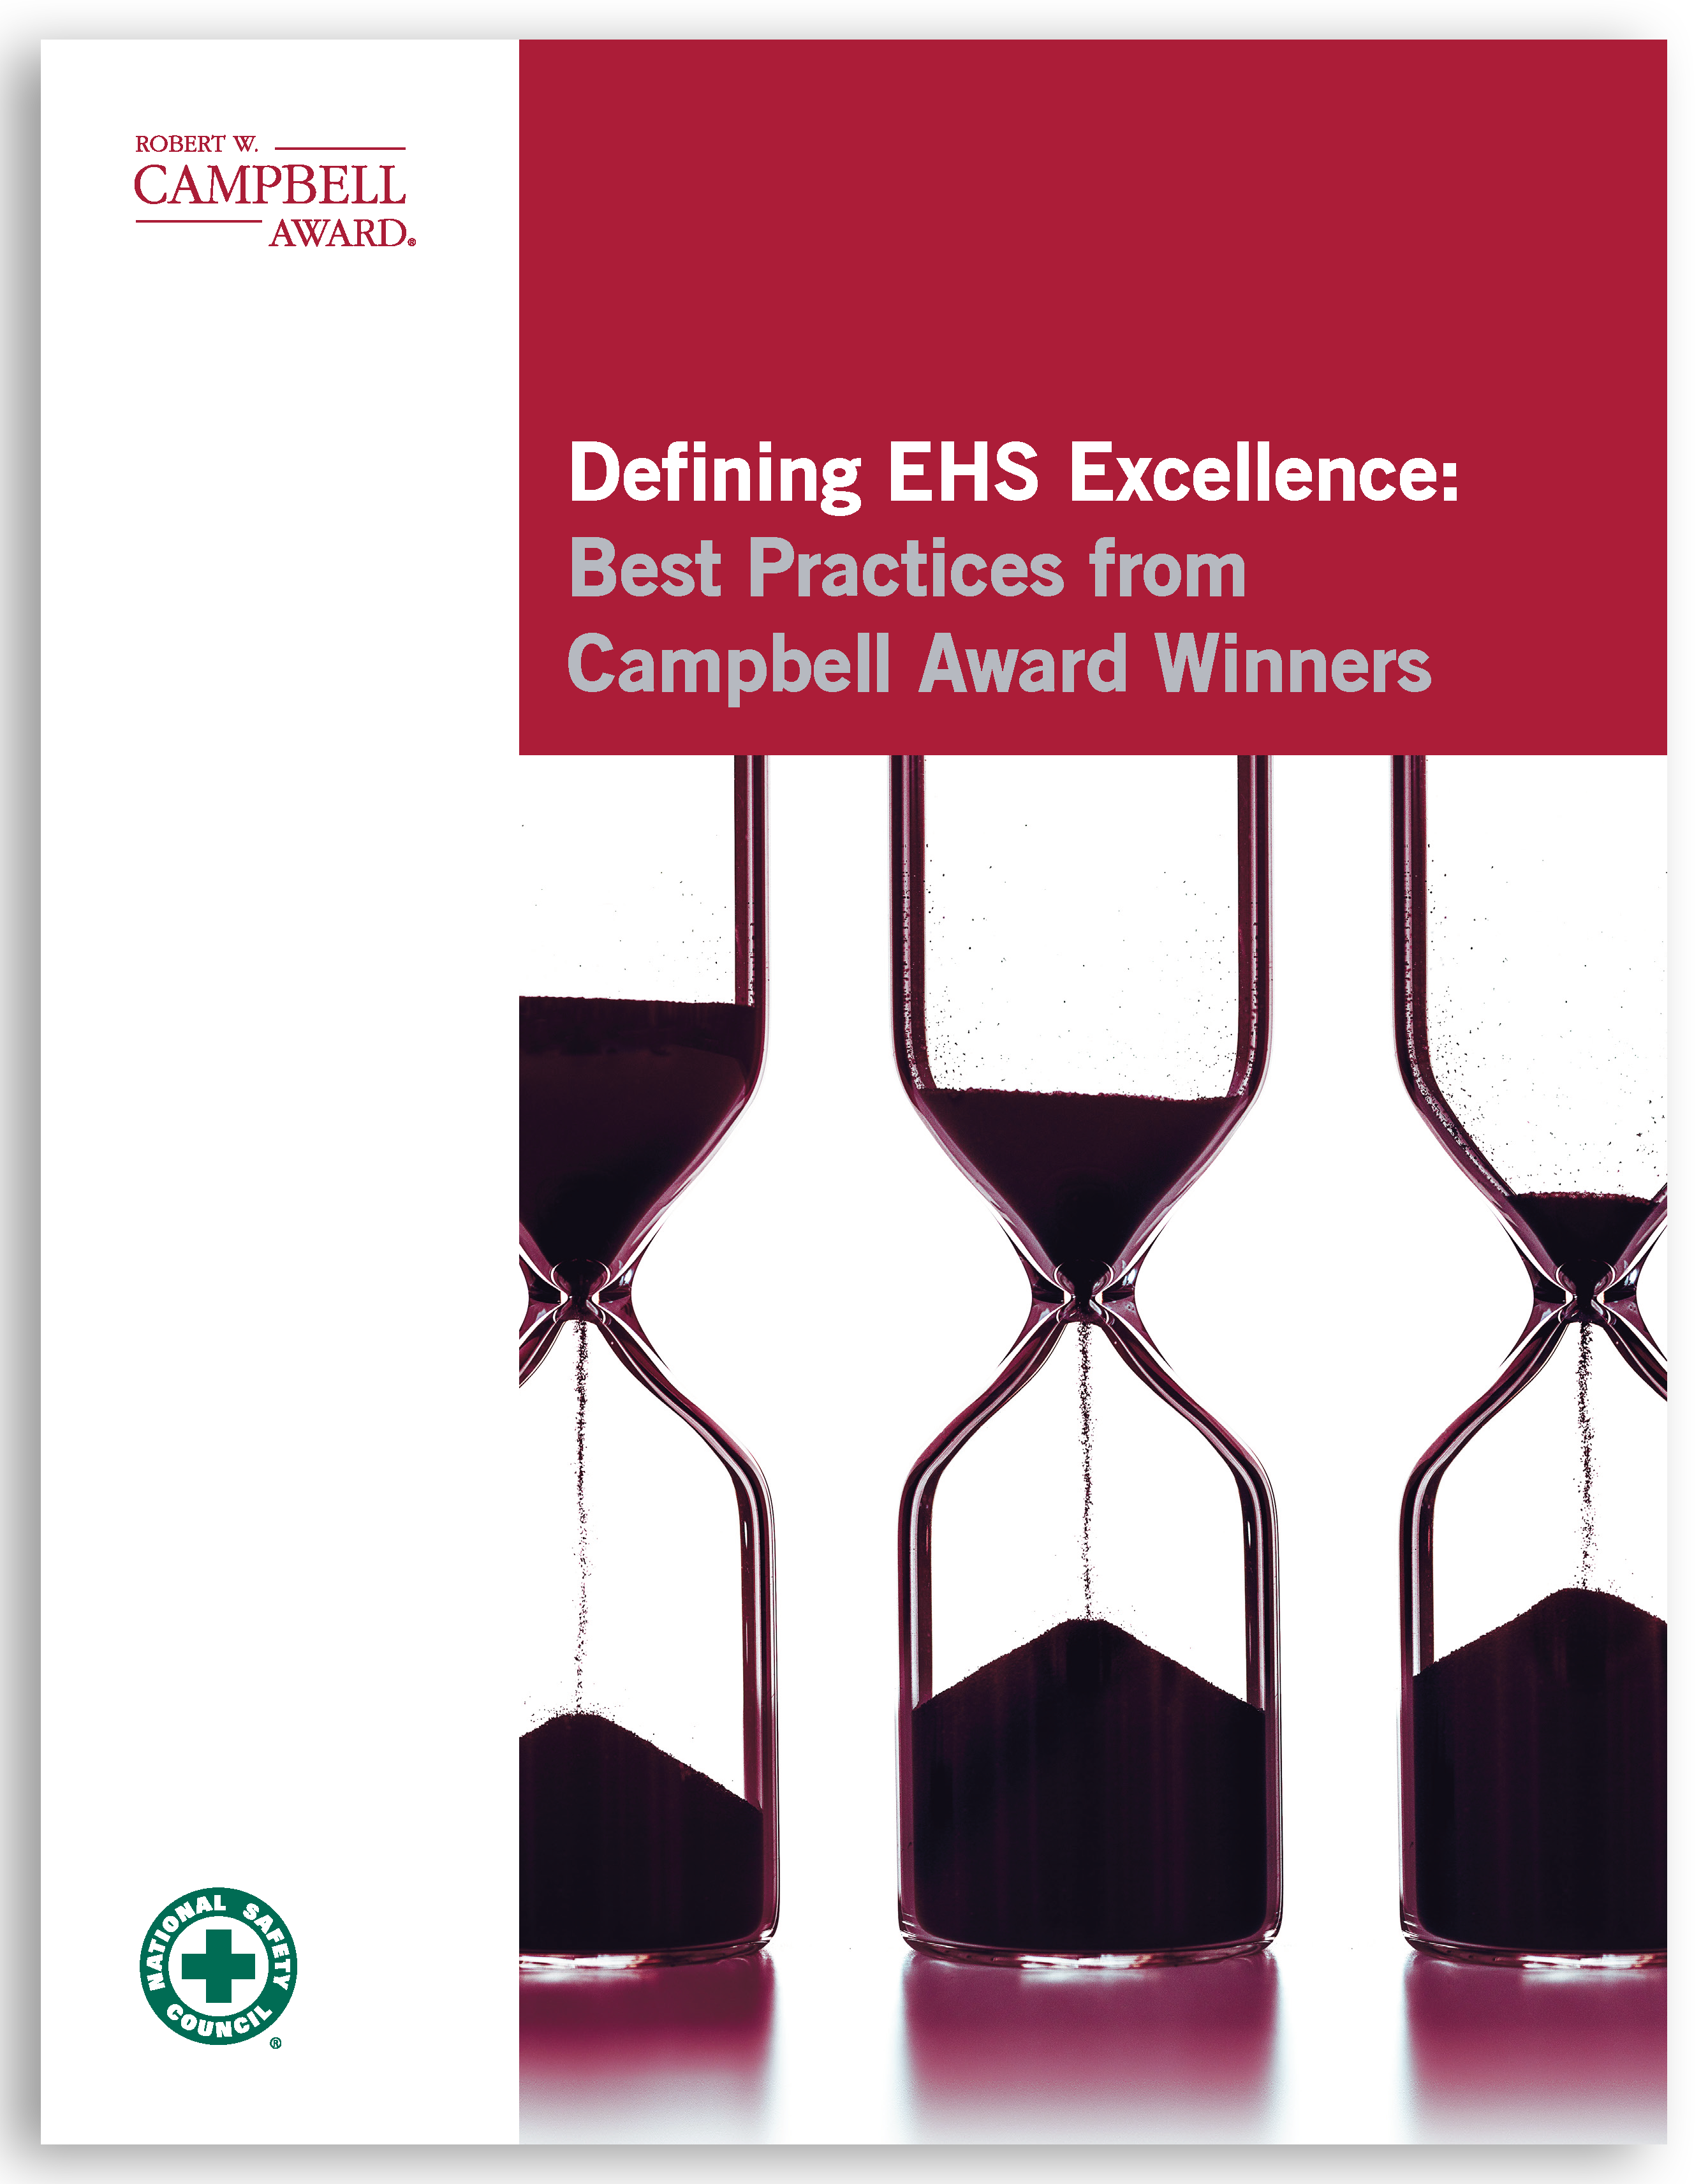 Defining EHS Excellence: Best Practices from Campbell Award Winners